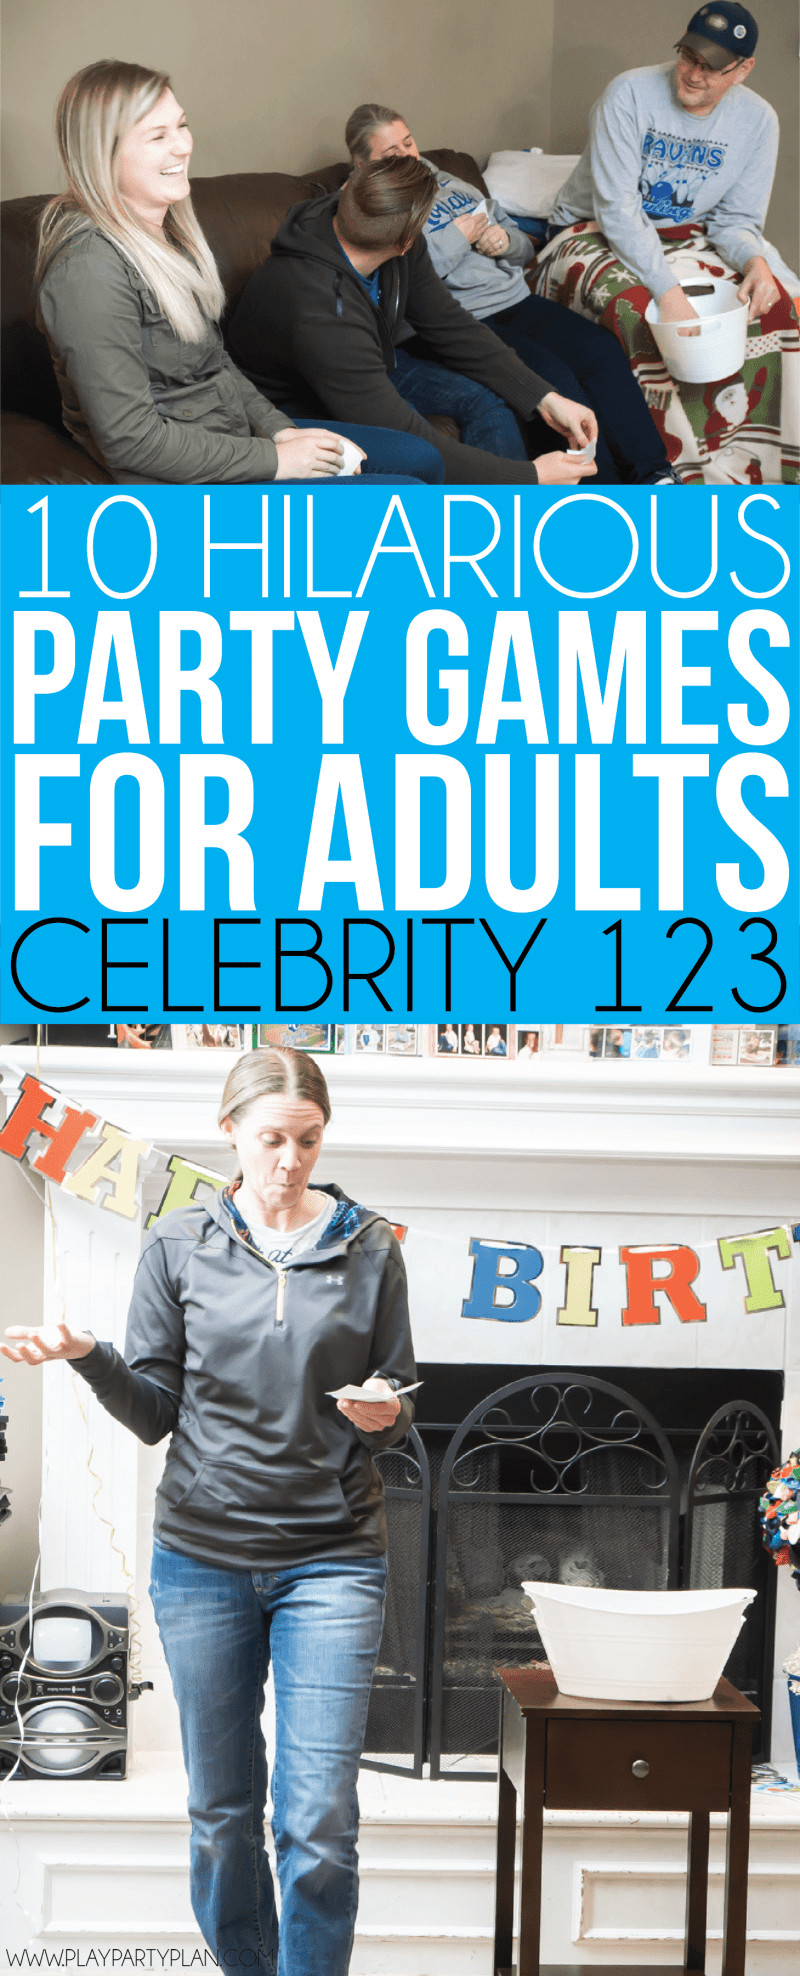 Party Activities Adults
 10 Hilarious Party Games for Adults that You ve Probably